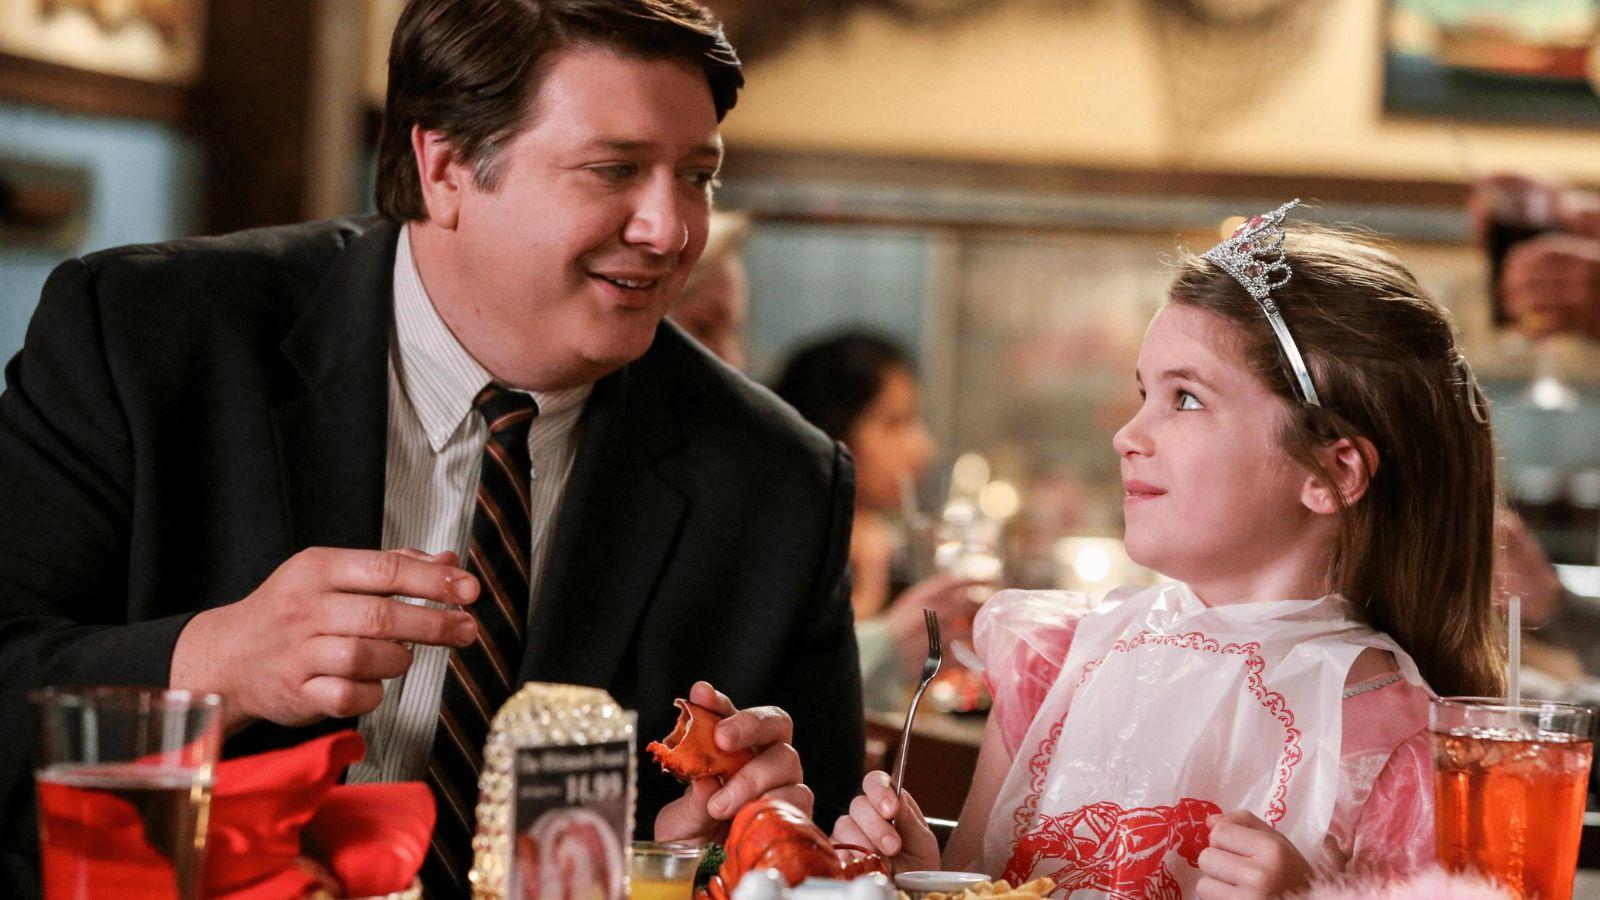 George and Missy at Red Lobster in Young Sheldon